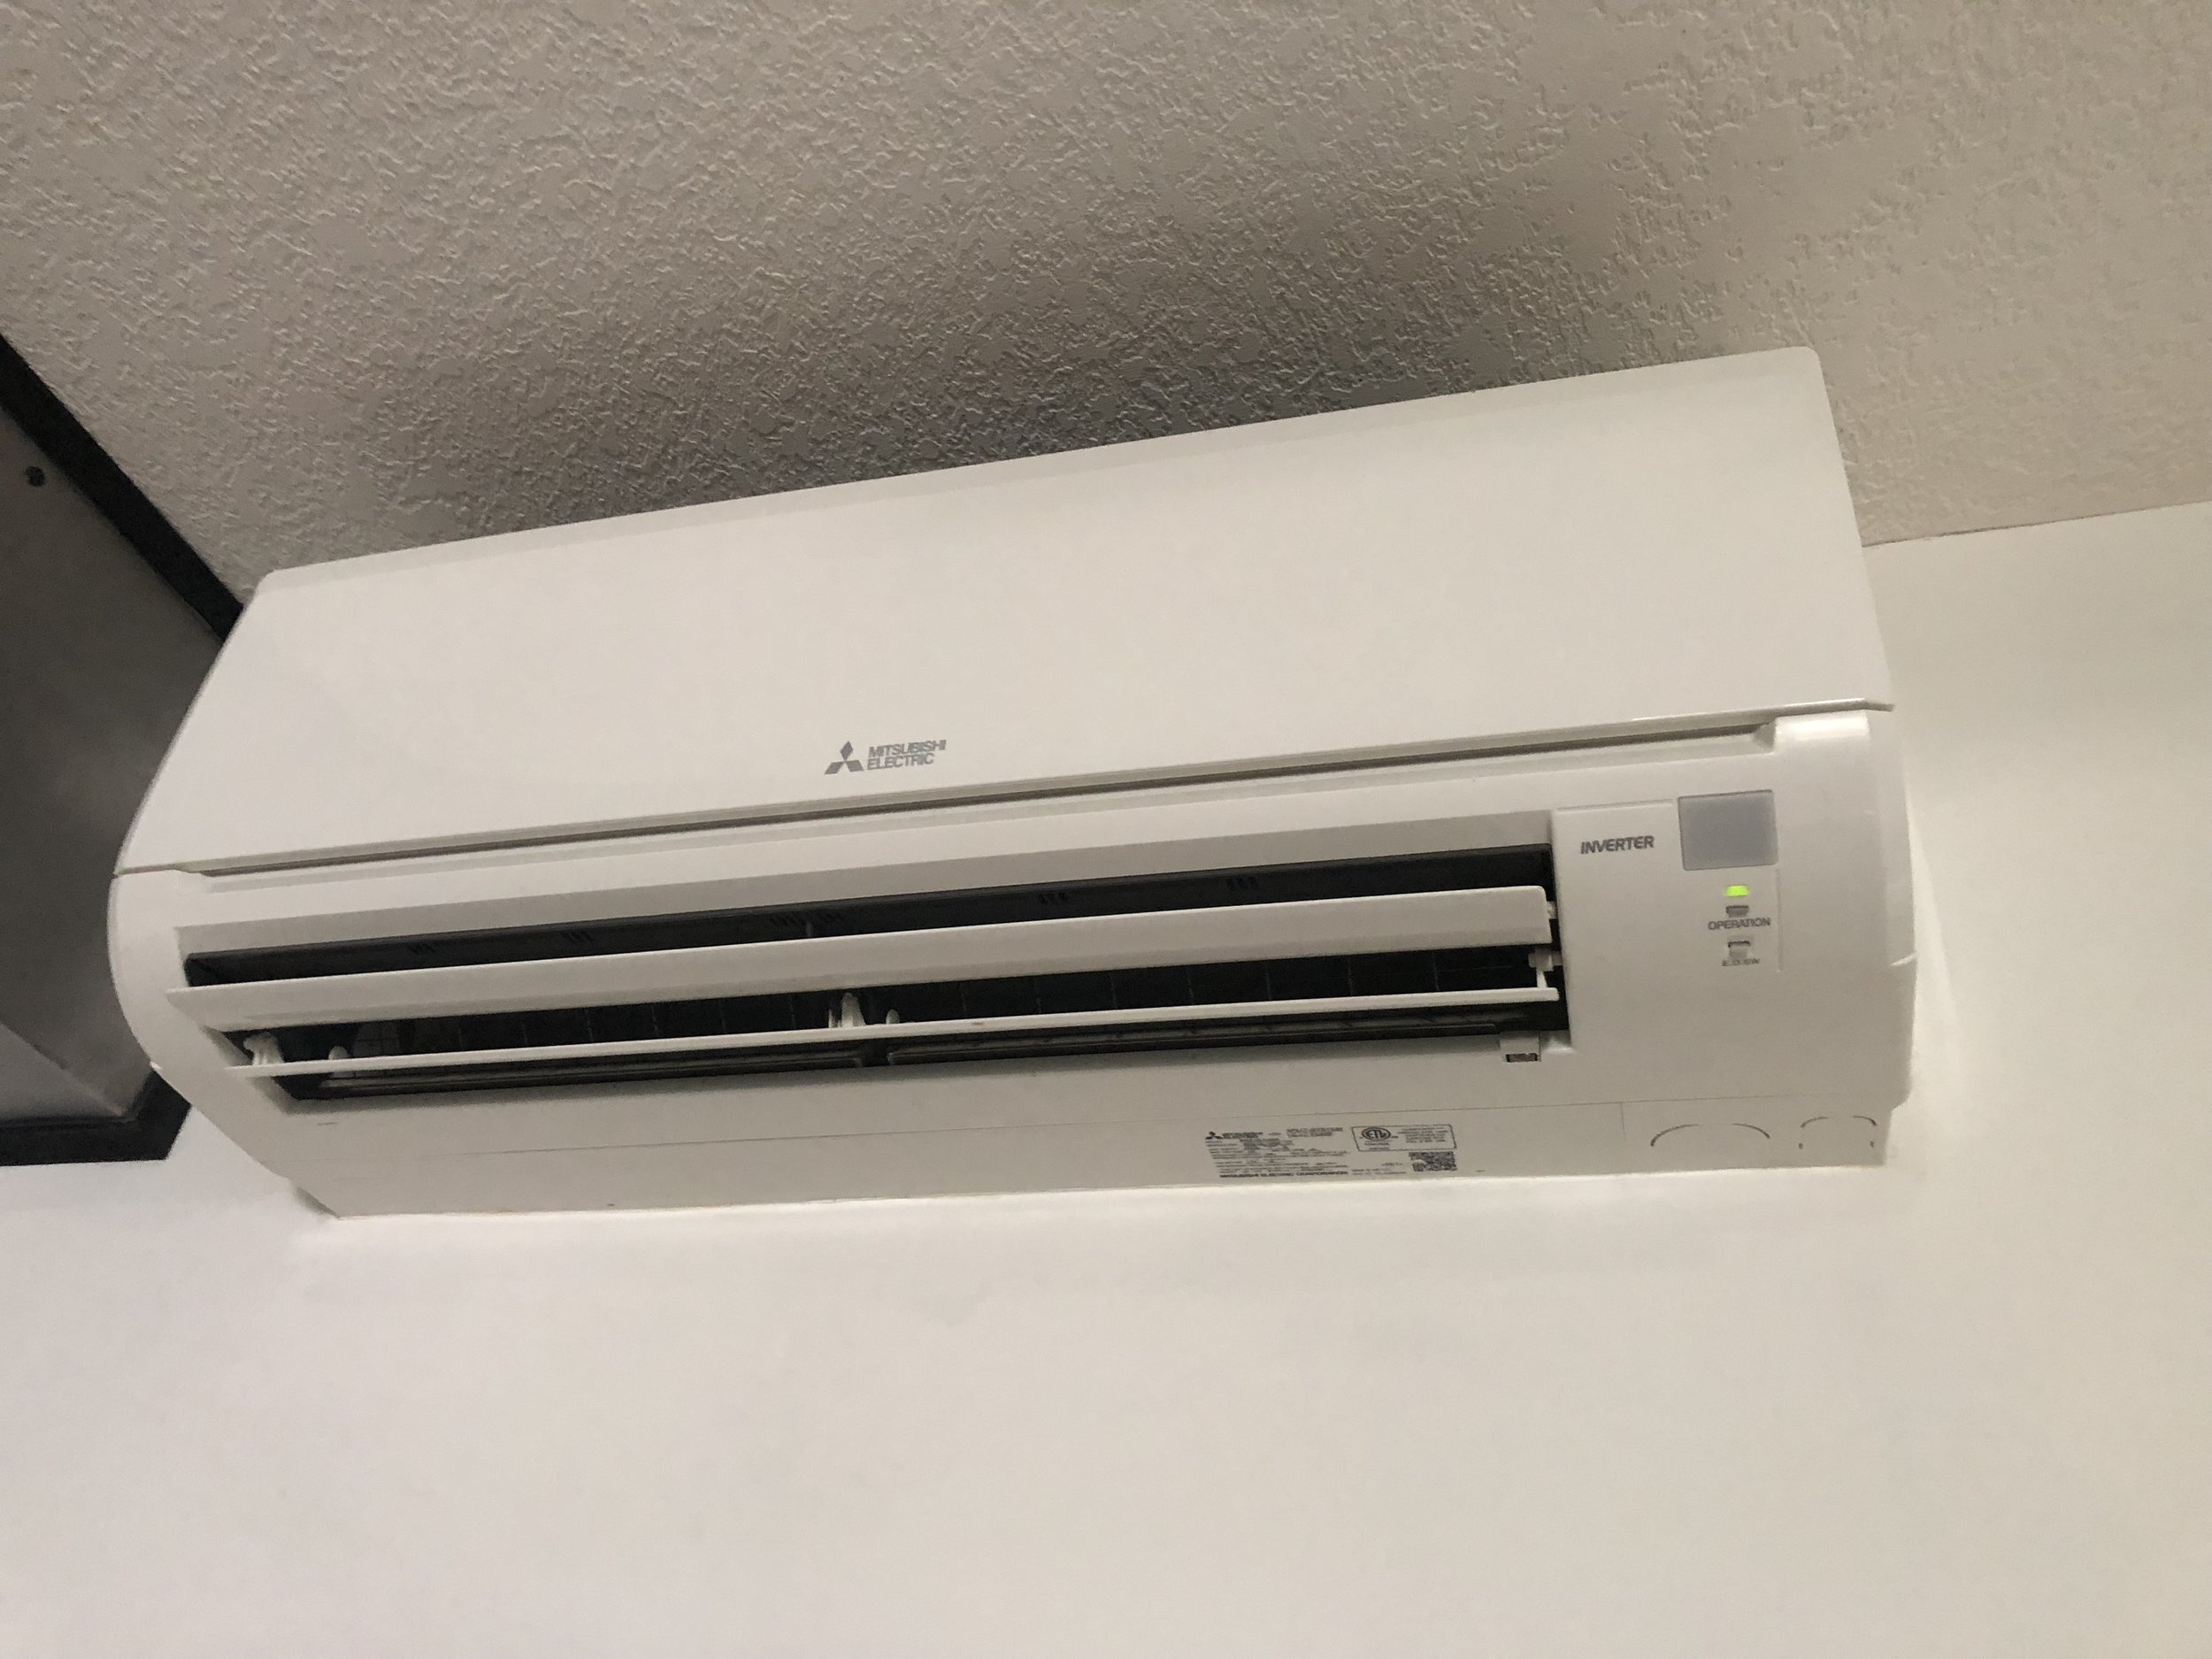 Mitsubishi Hyperheat HVAC Ductless System in New Construction Home Bourbonnais, IL 60914